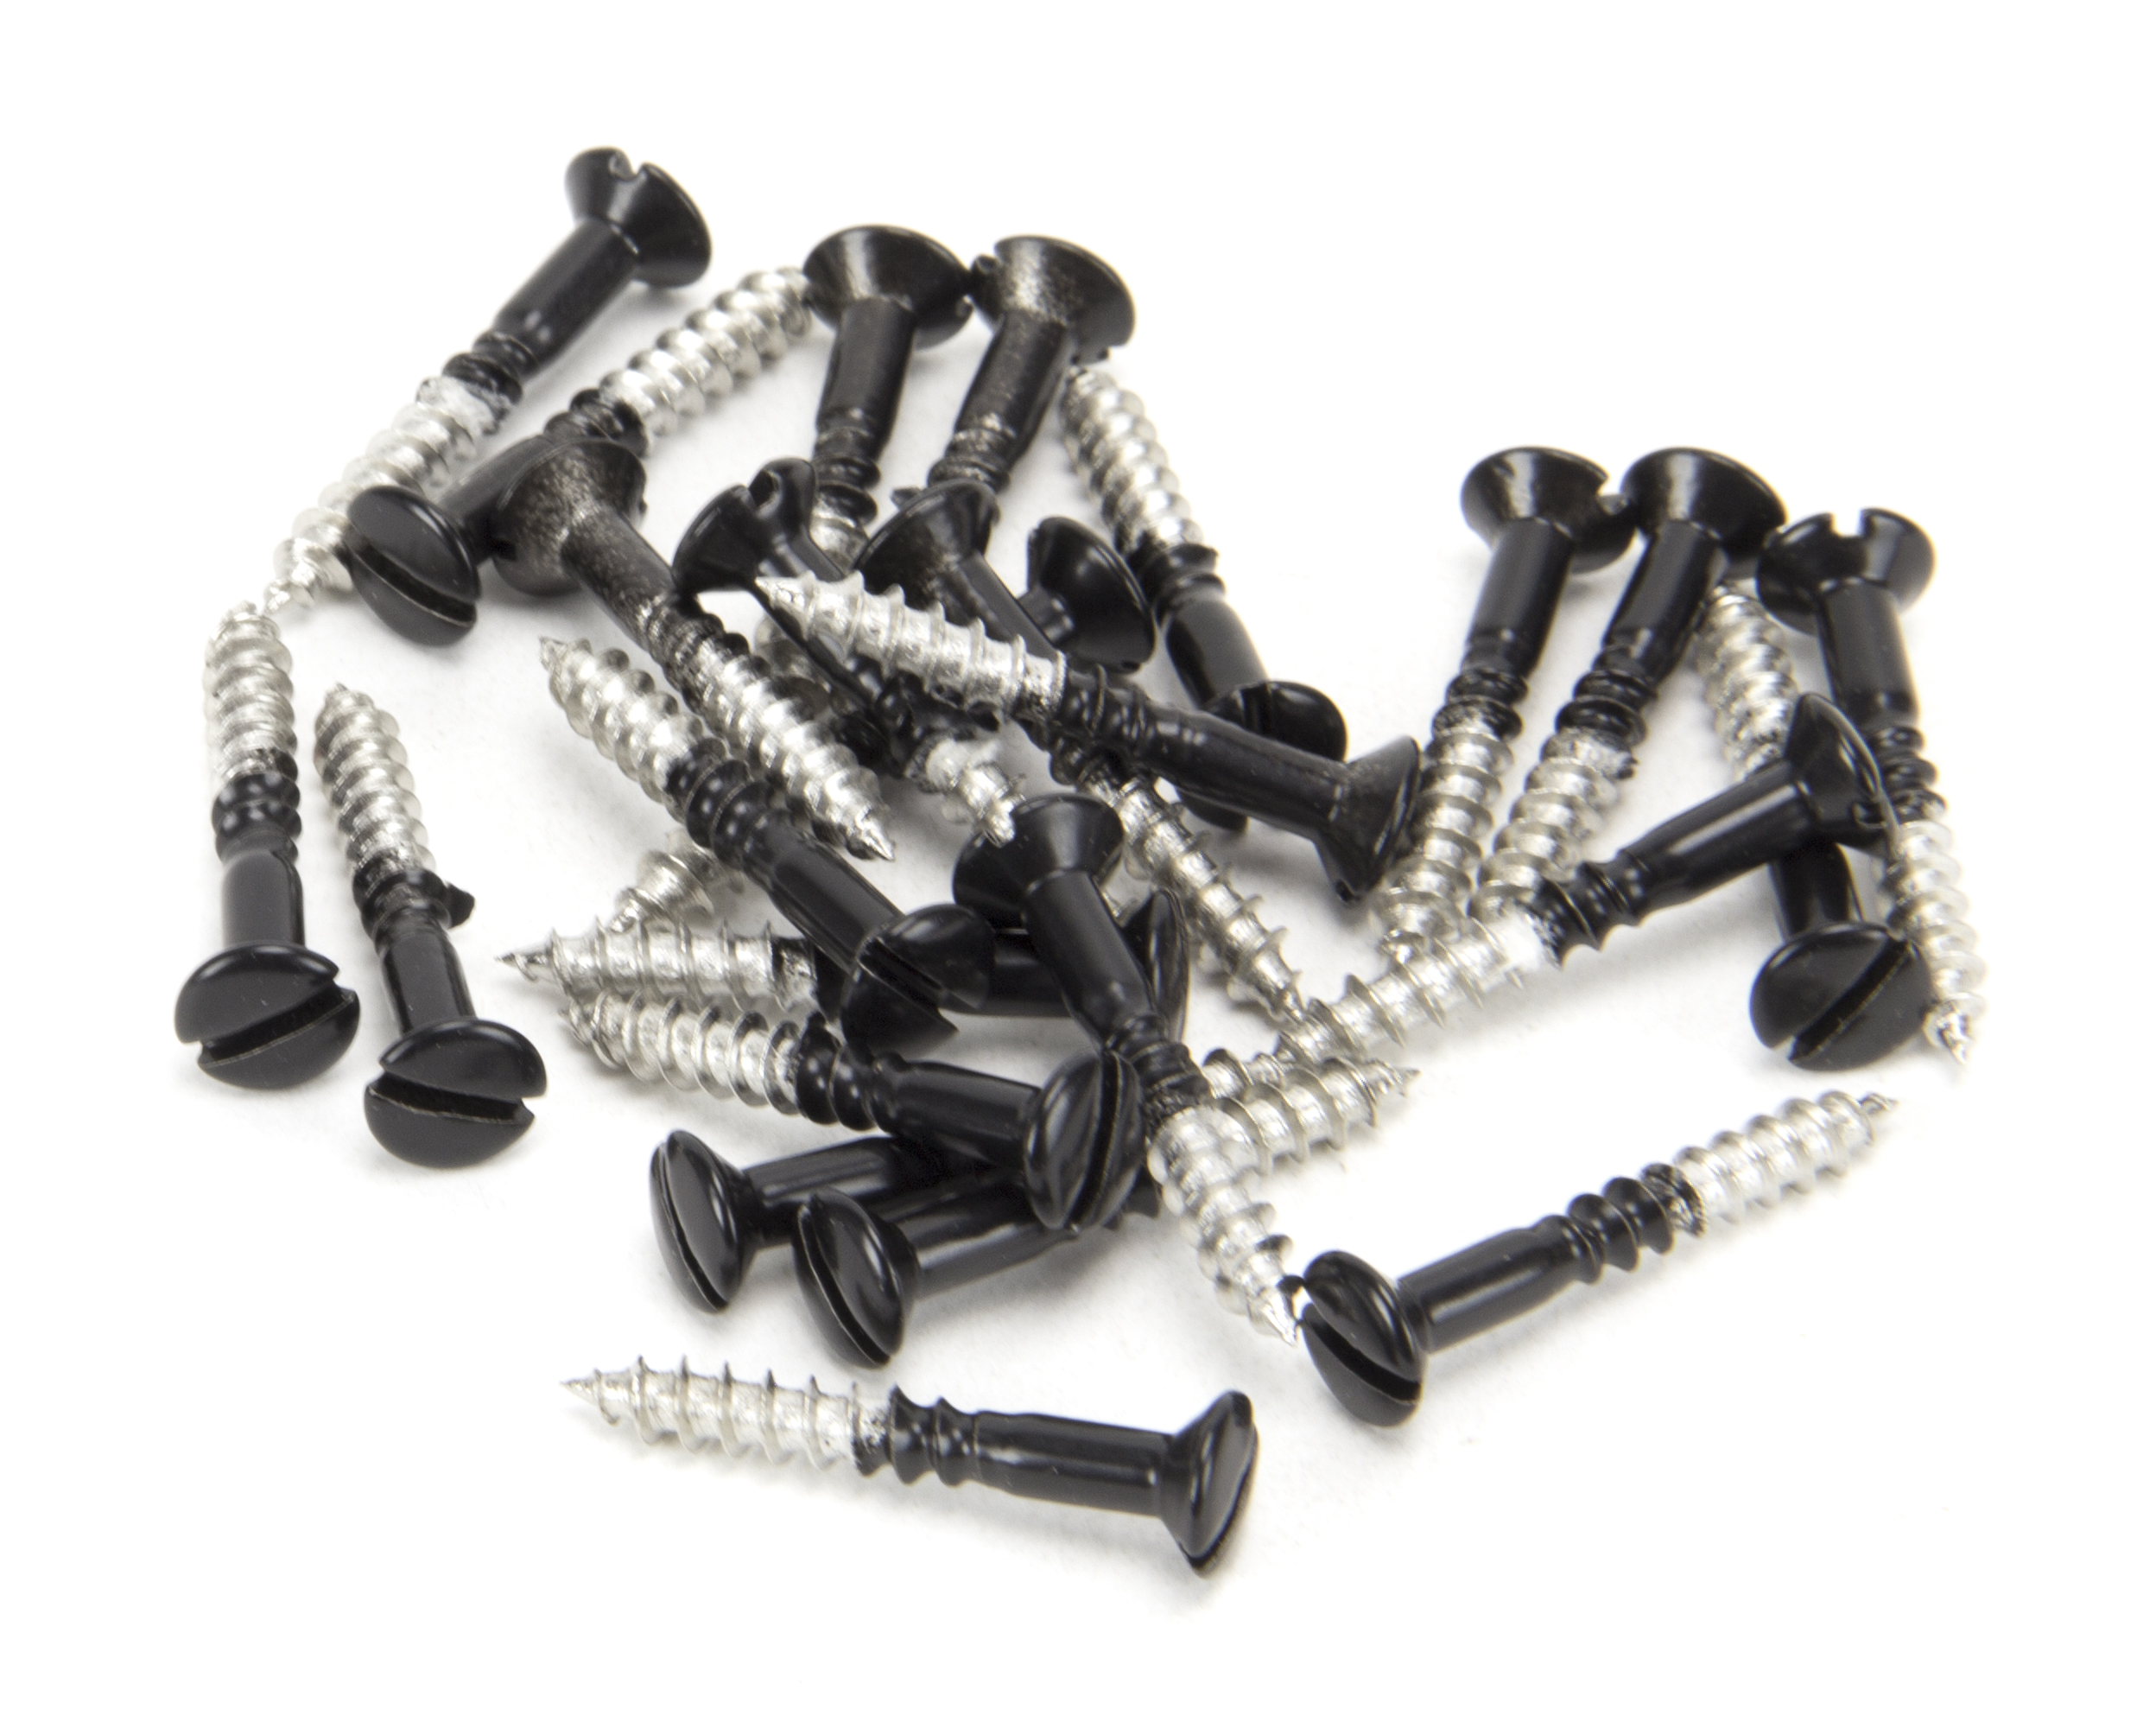 Countersunk Roundhead Screws - 3.5 x 25 - Pack of 25